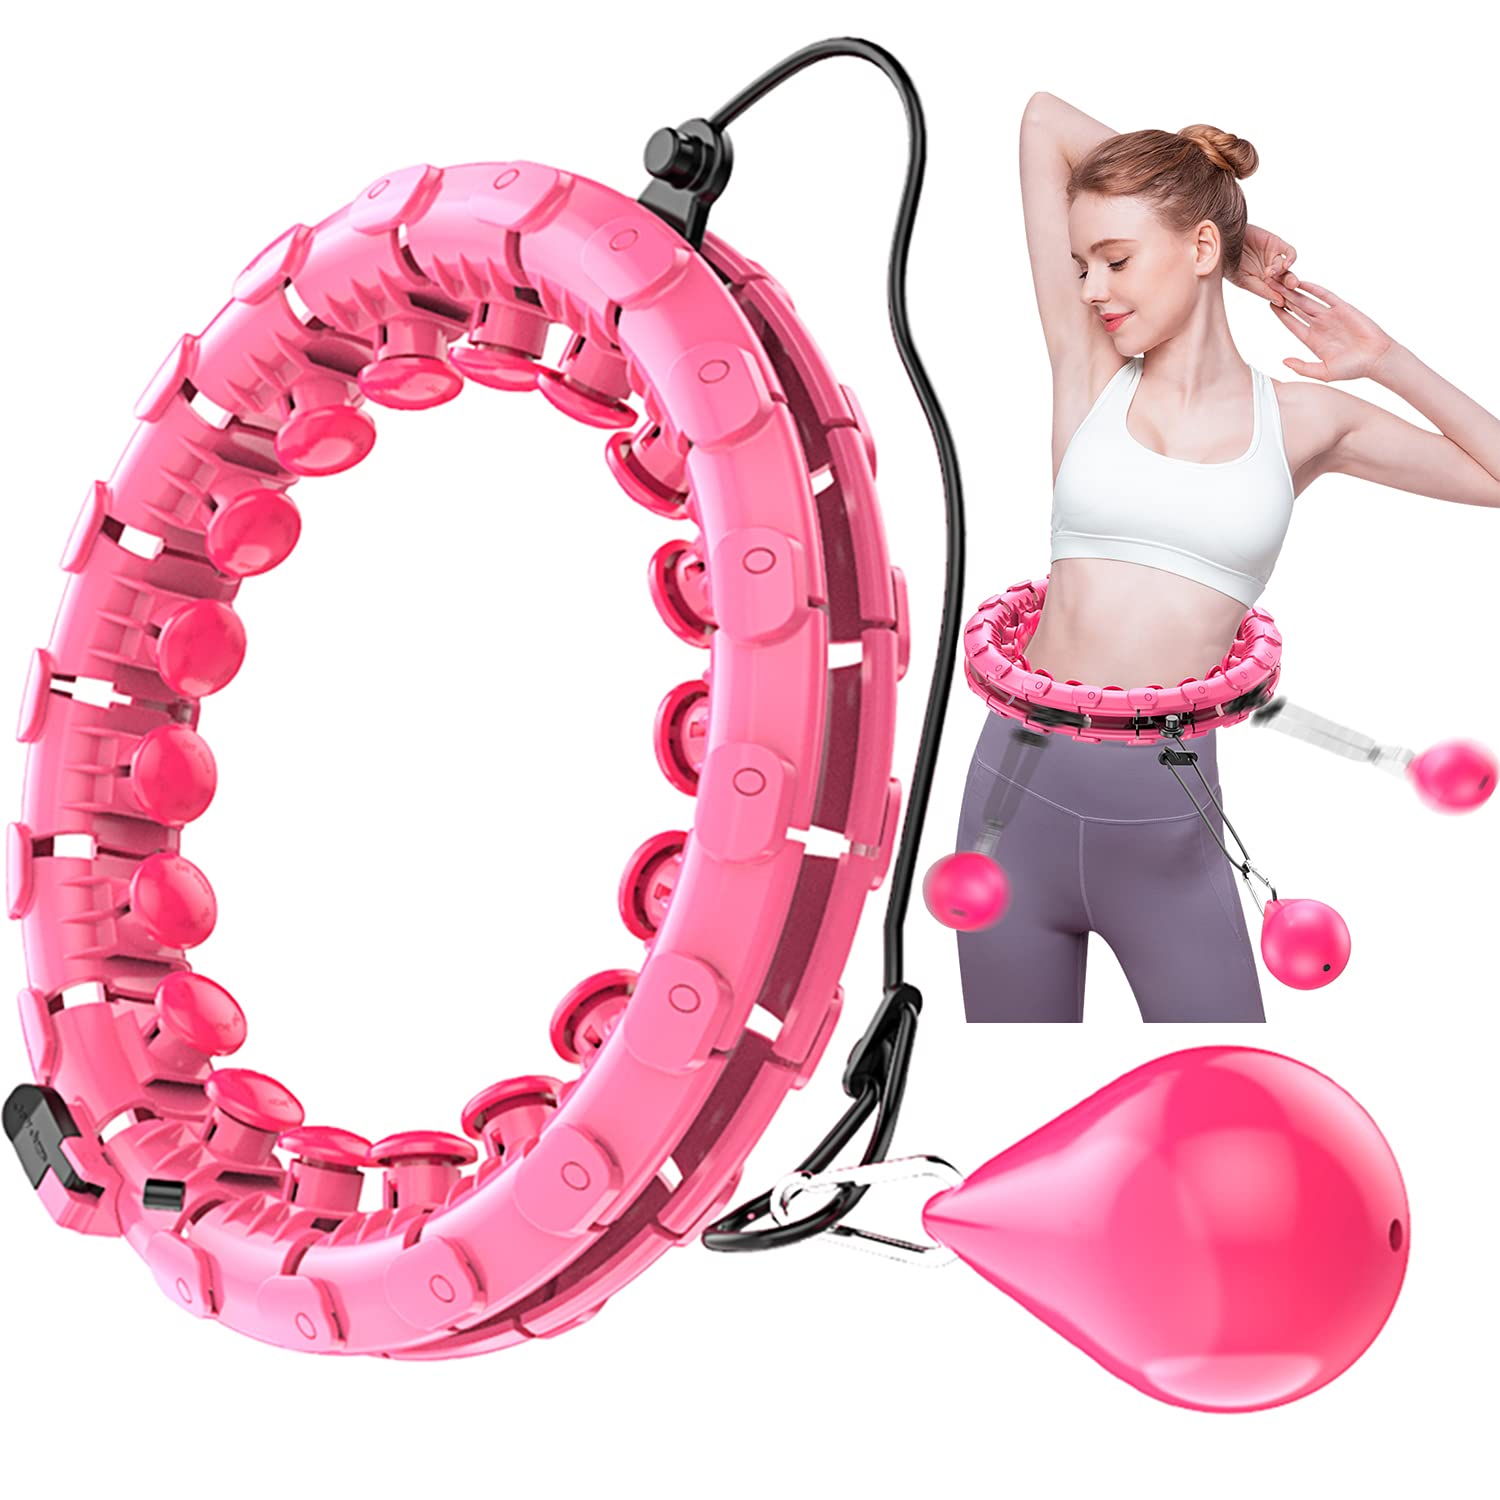 14 X LEAFIA SMART HULA HOOP, DETACHABLE 24 SECTIONS AND ADJUSTABLE SOFT TIRE MASSAGE, NO FALLING, FOR ADULTS, KIDS, BEGINNERS, CHILDREN, FITNESS, MASSAGE, WEIGHT LOSS, EXERCISE, WEIGHTED, SPORTS (PIN